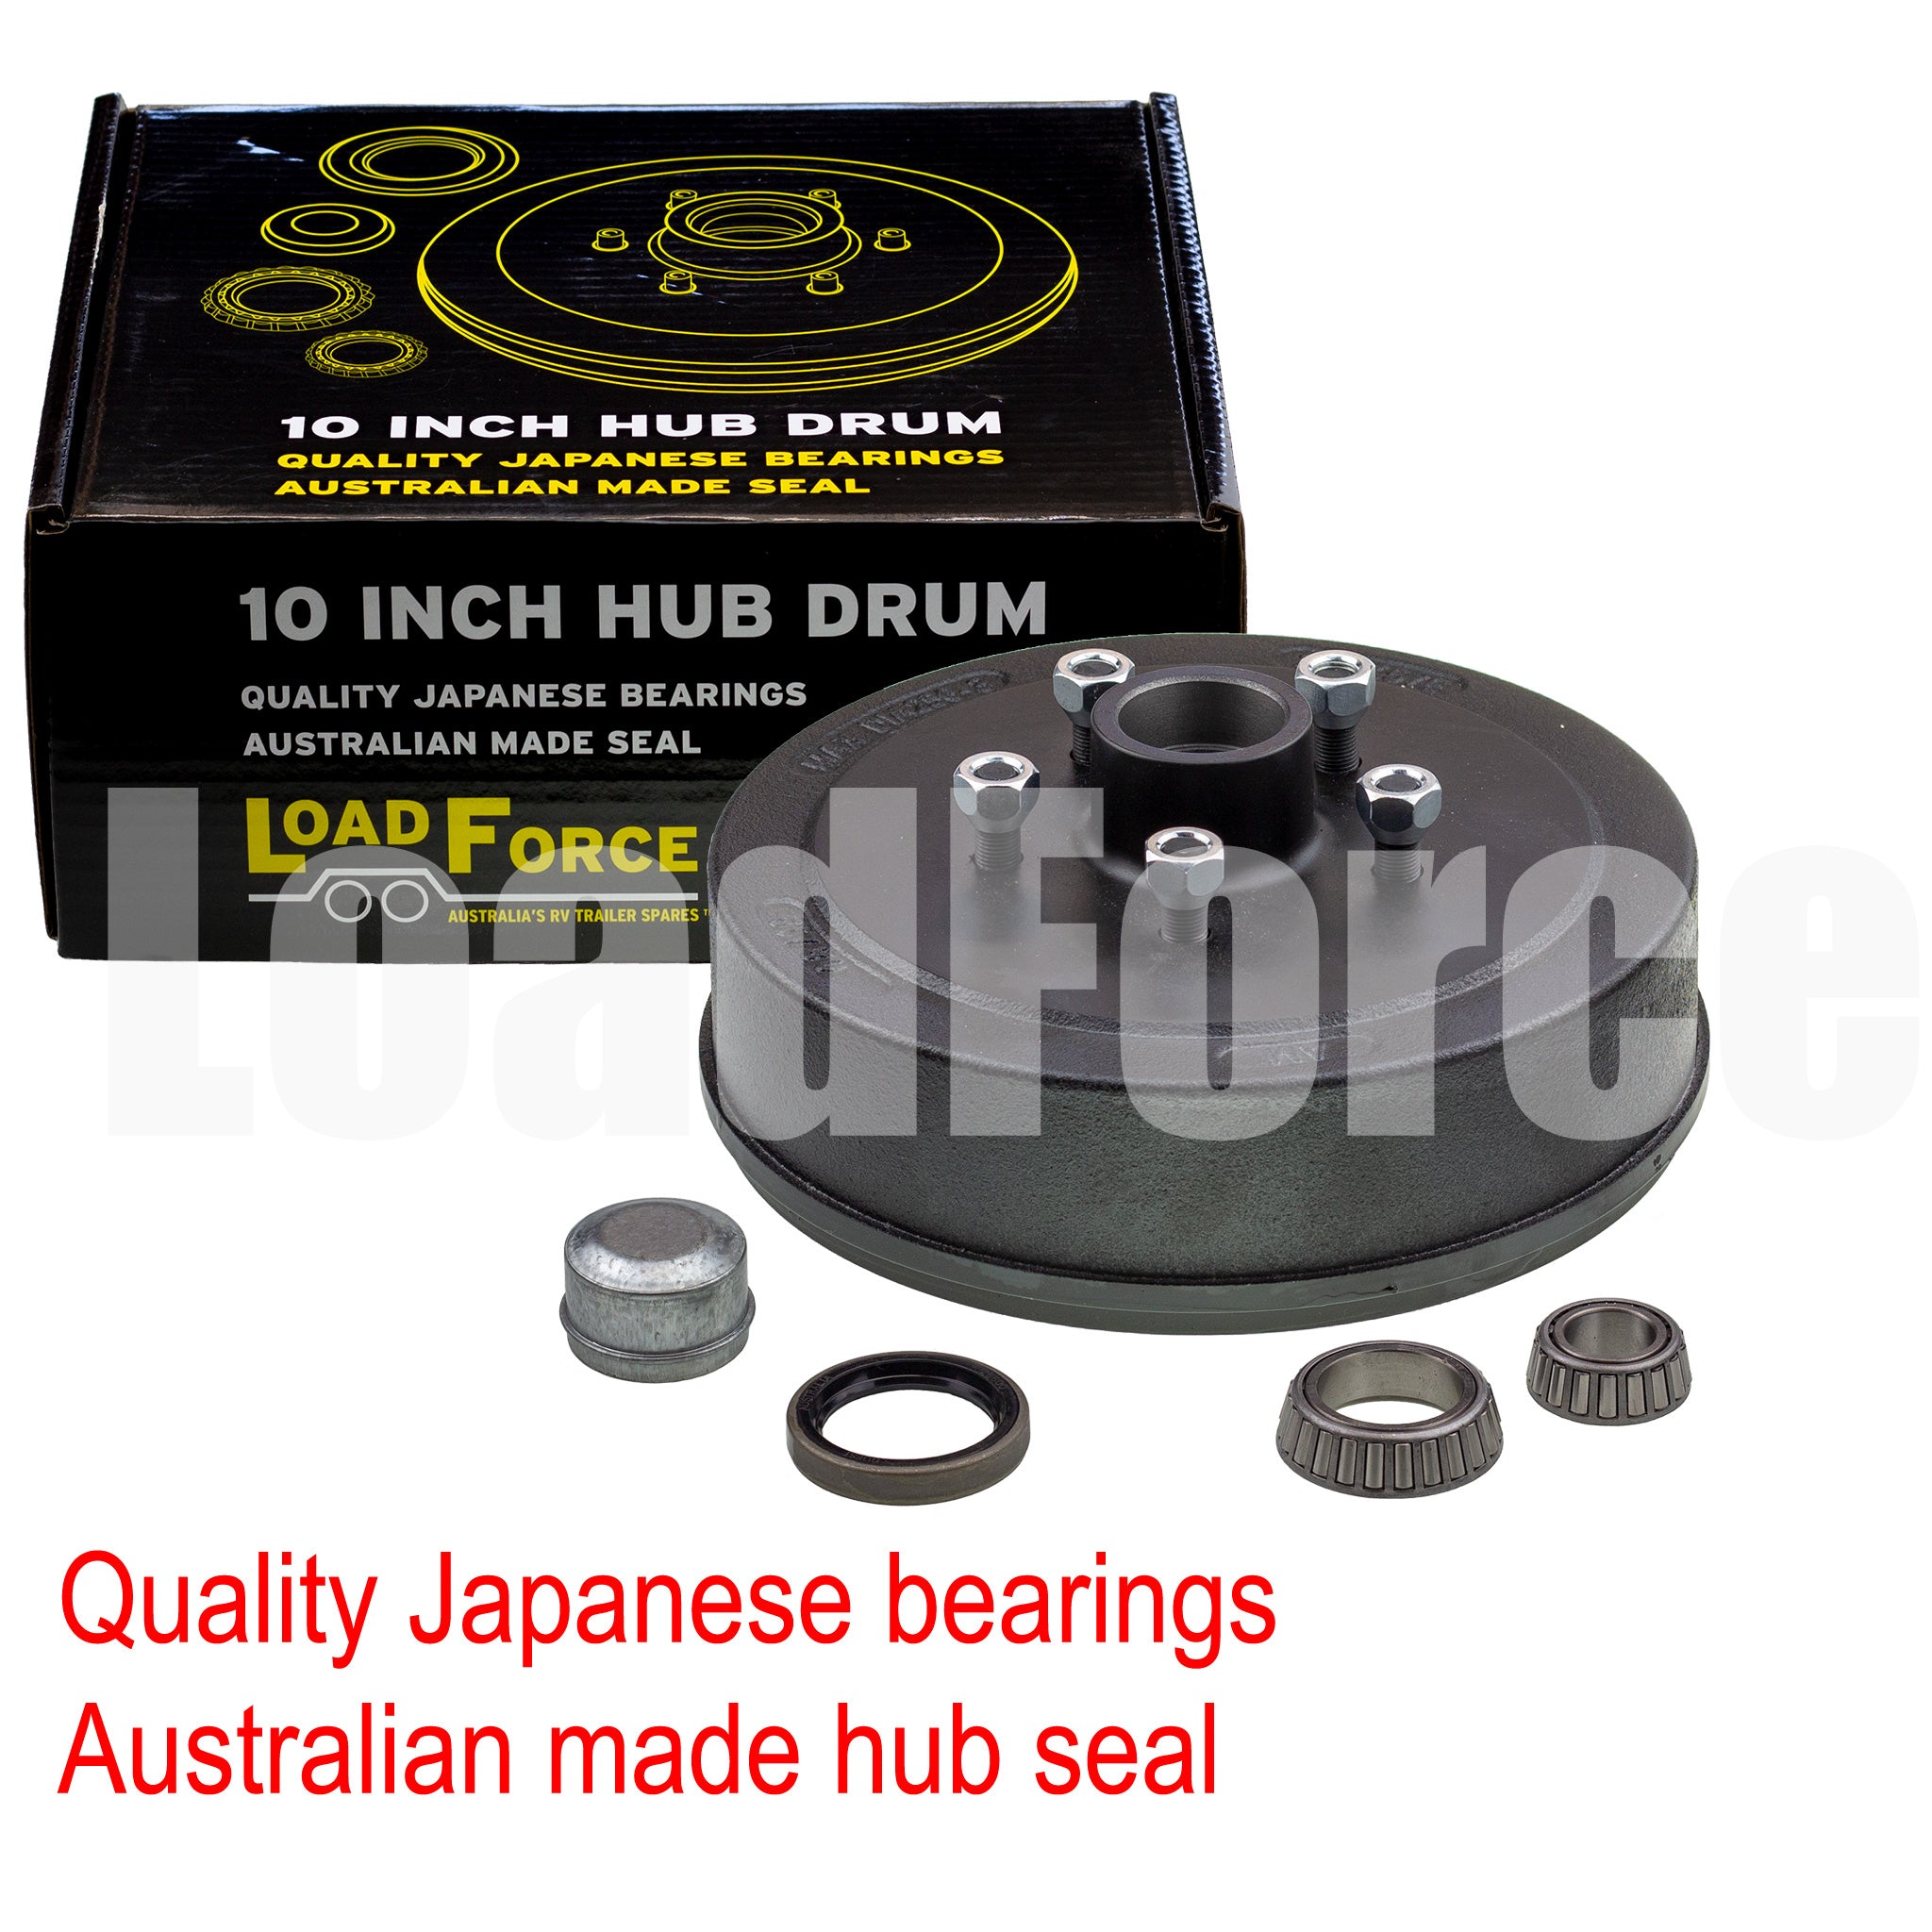 LoadForce Hub drum 10 x 2.25 inch Commodore 5 stud with LM (Holden) bearing